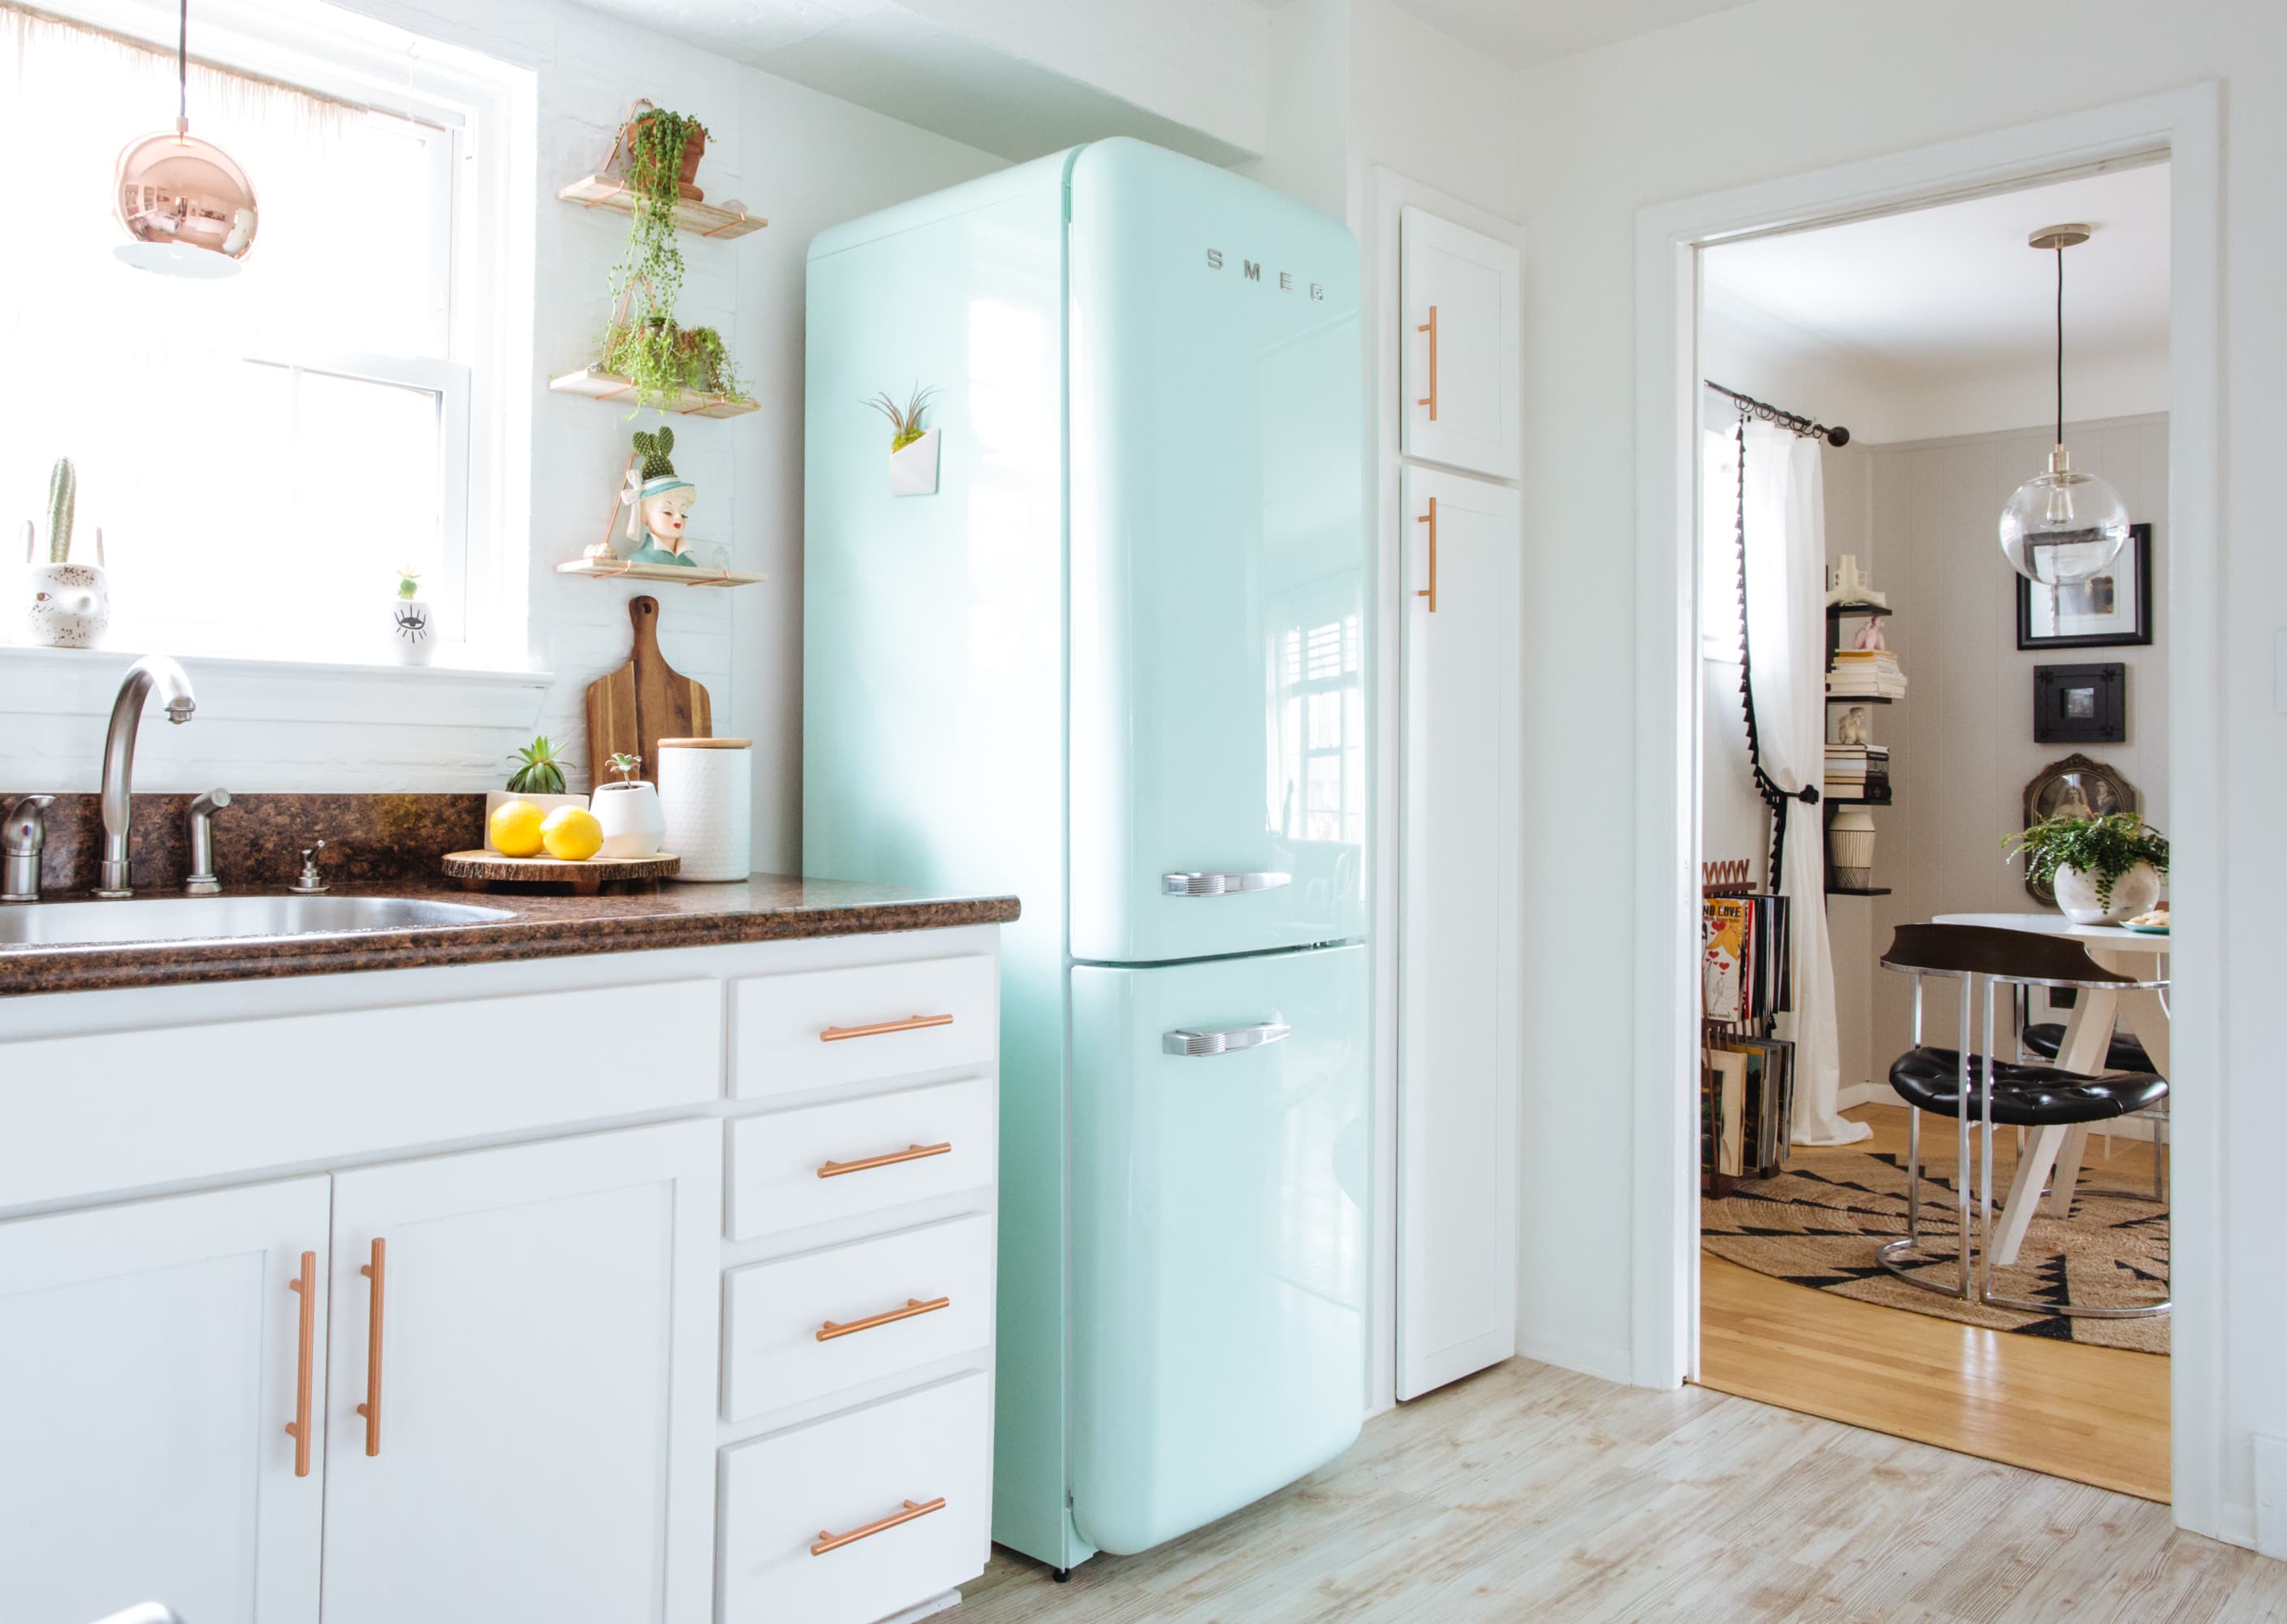 SMEG leading the way in kitchen applicance design